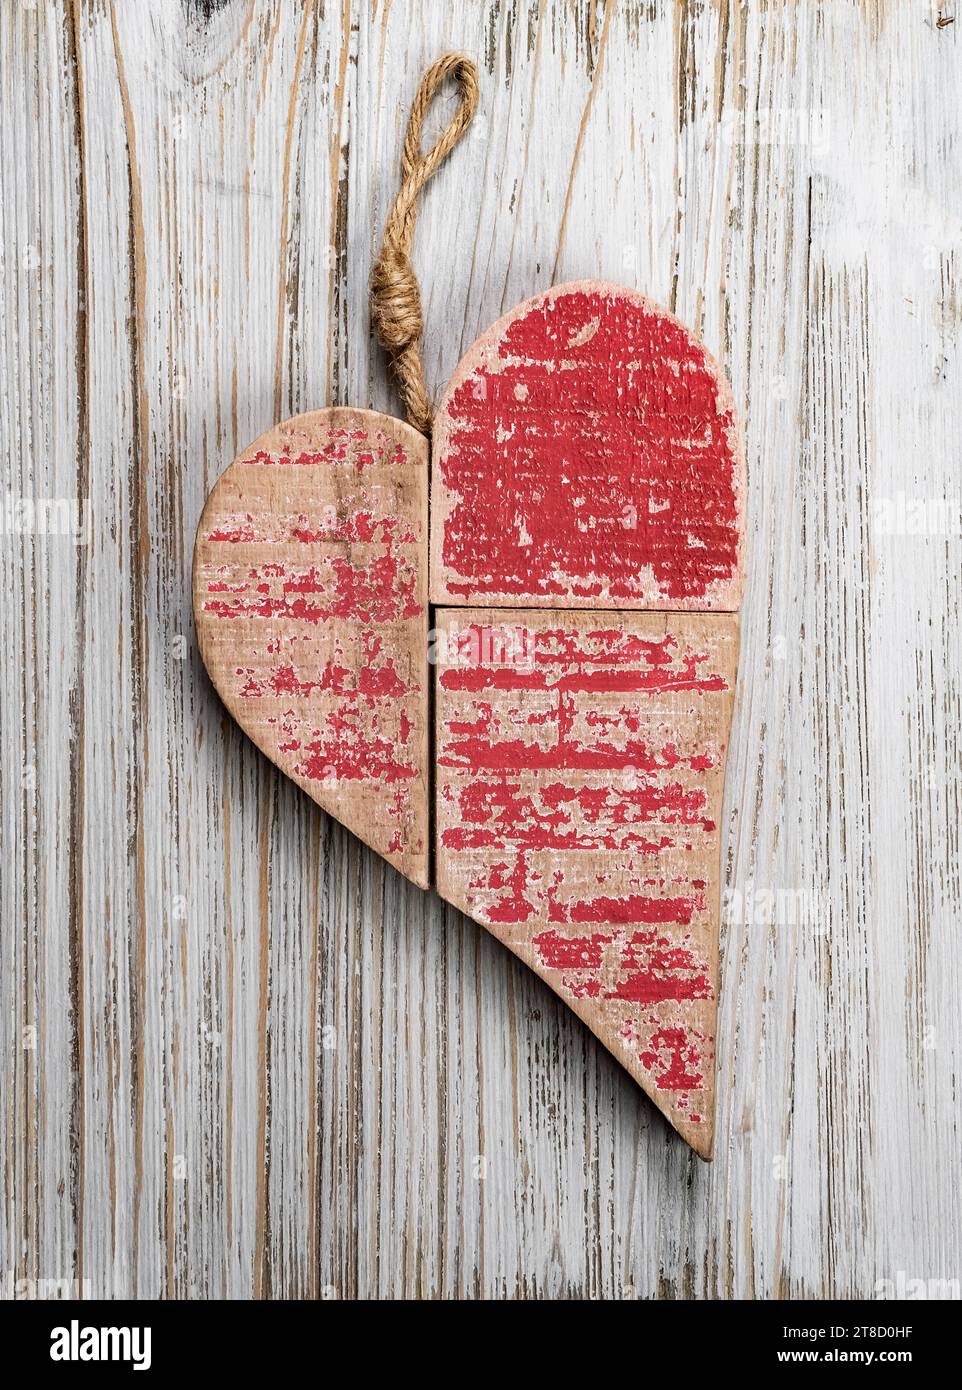 Valentine day. Red heart on the wooden boards. Stock Photo